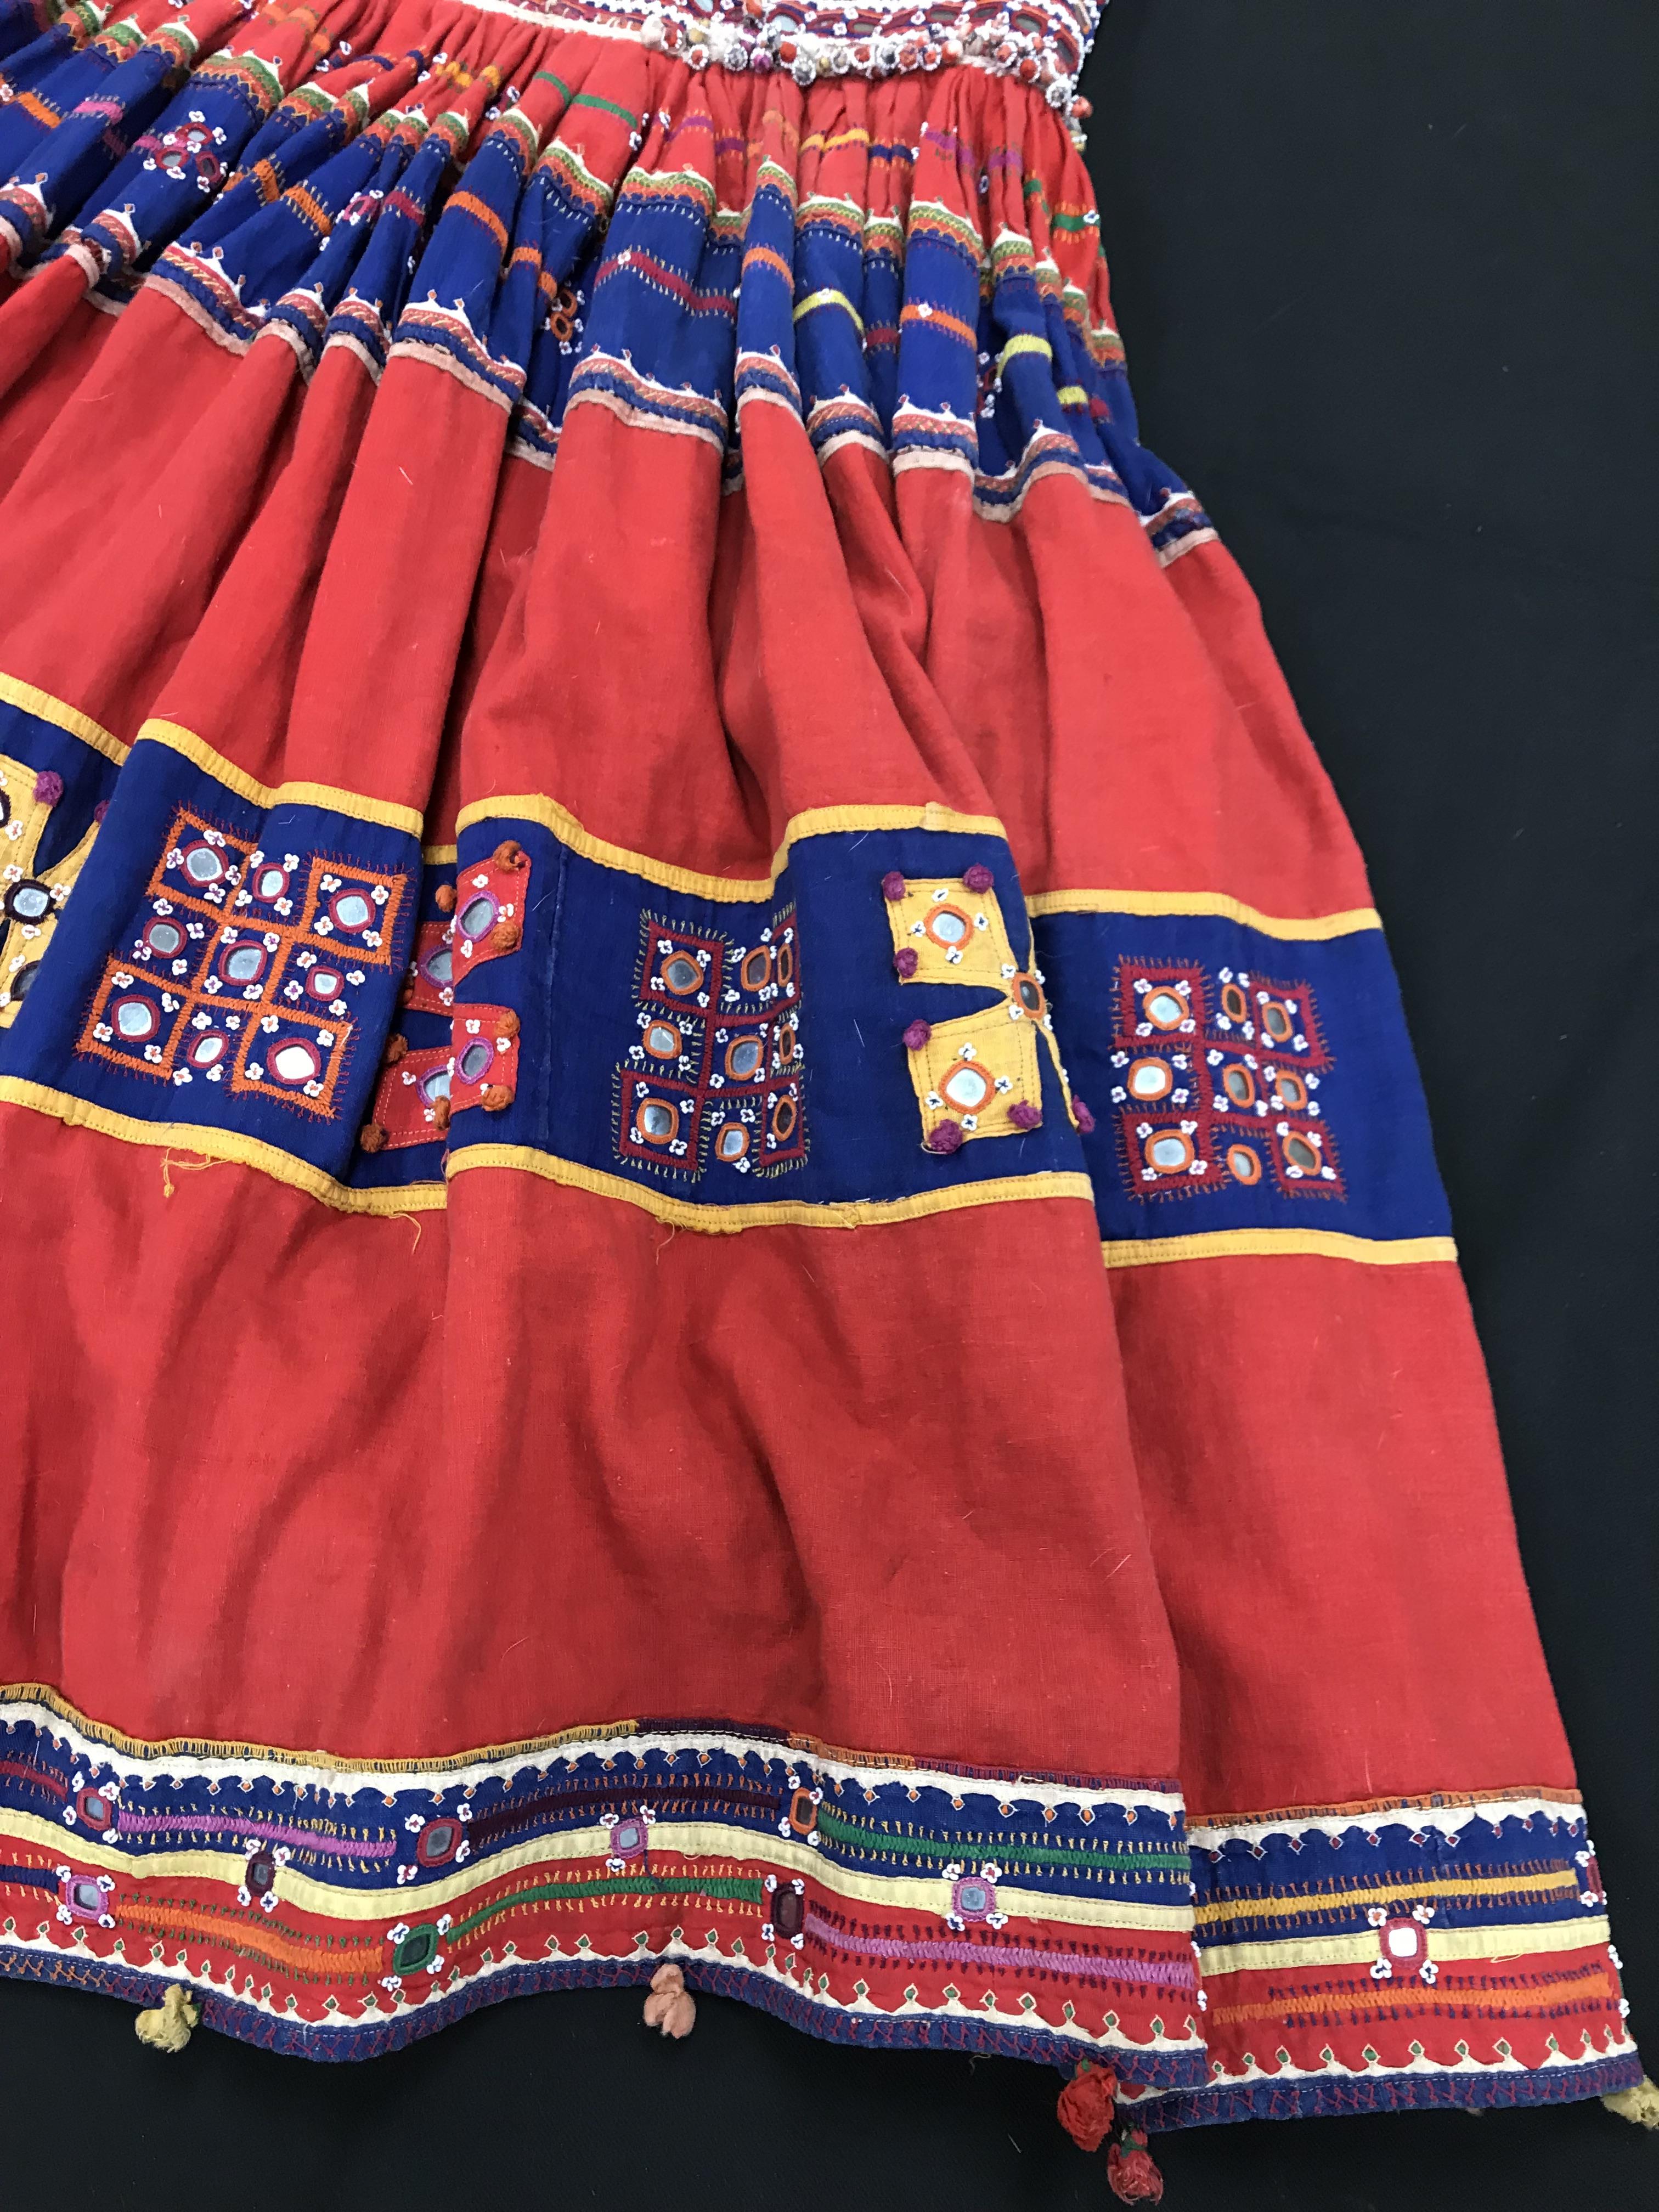 A Rajhistani skirt in red and blue stripes with overlaid embroidery and mirrored decorations, - Image 6 of 14